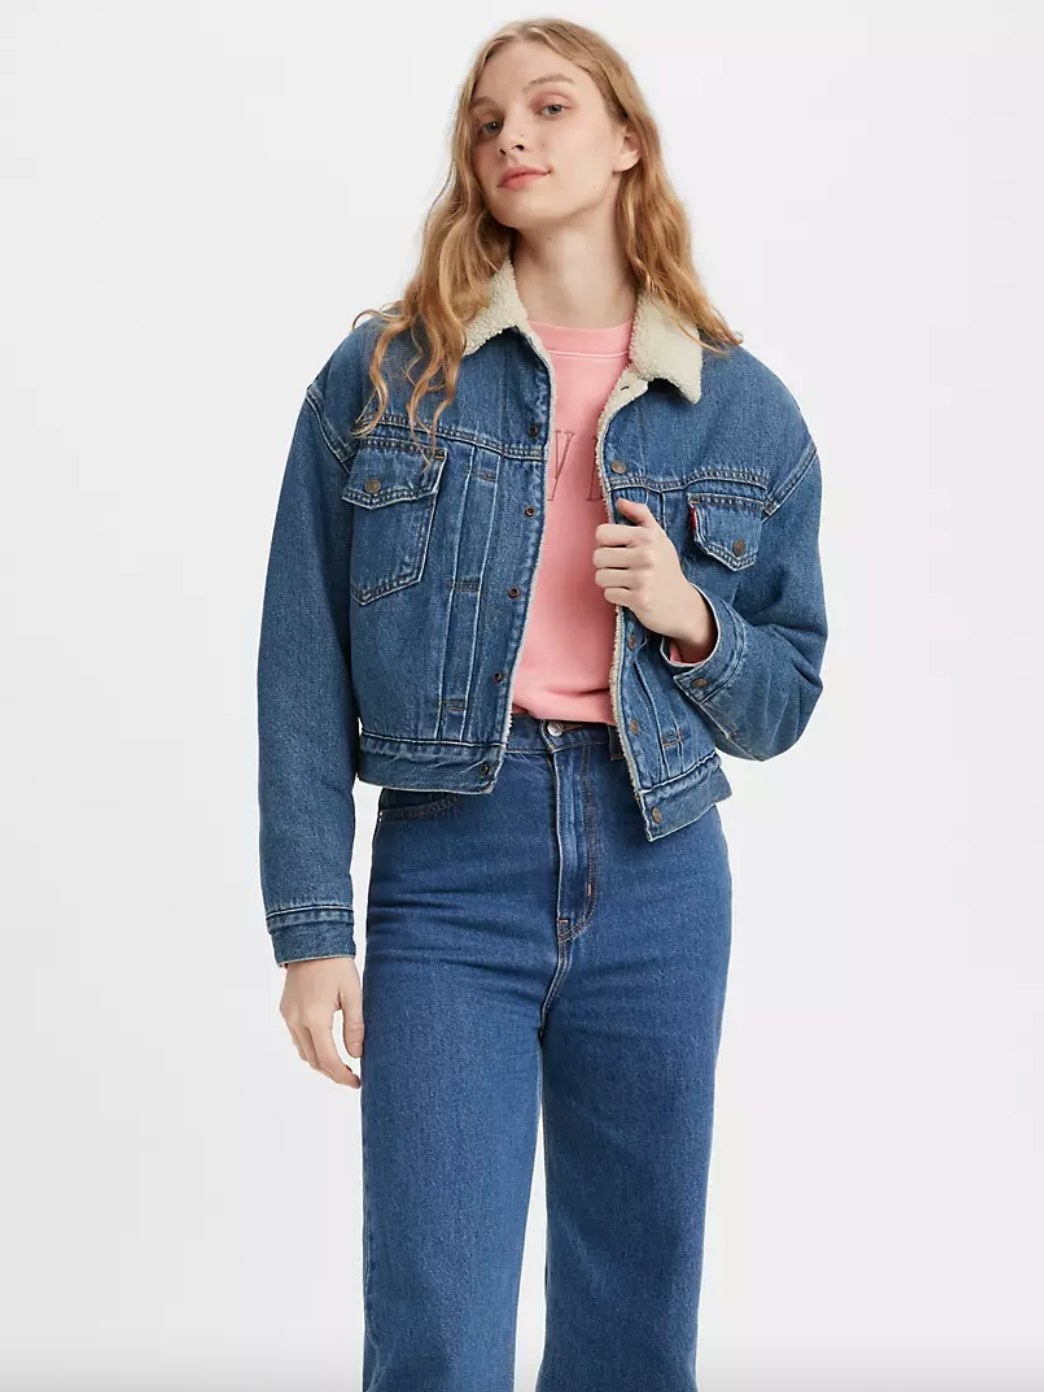 Levi's Just Launched A Massive Sale And We Need A Canadian Tuxedo